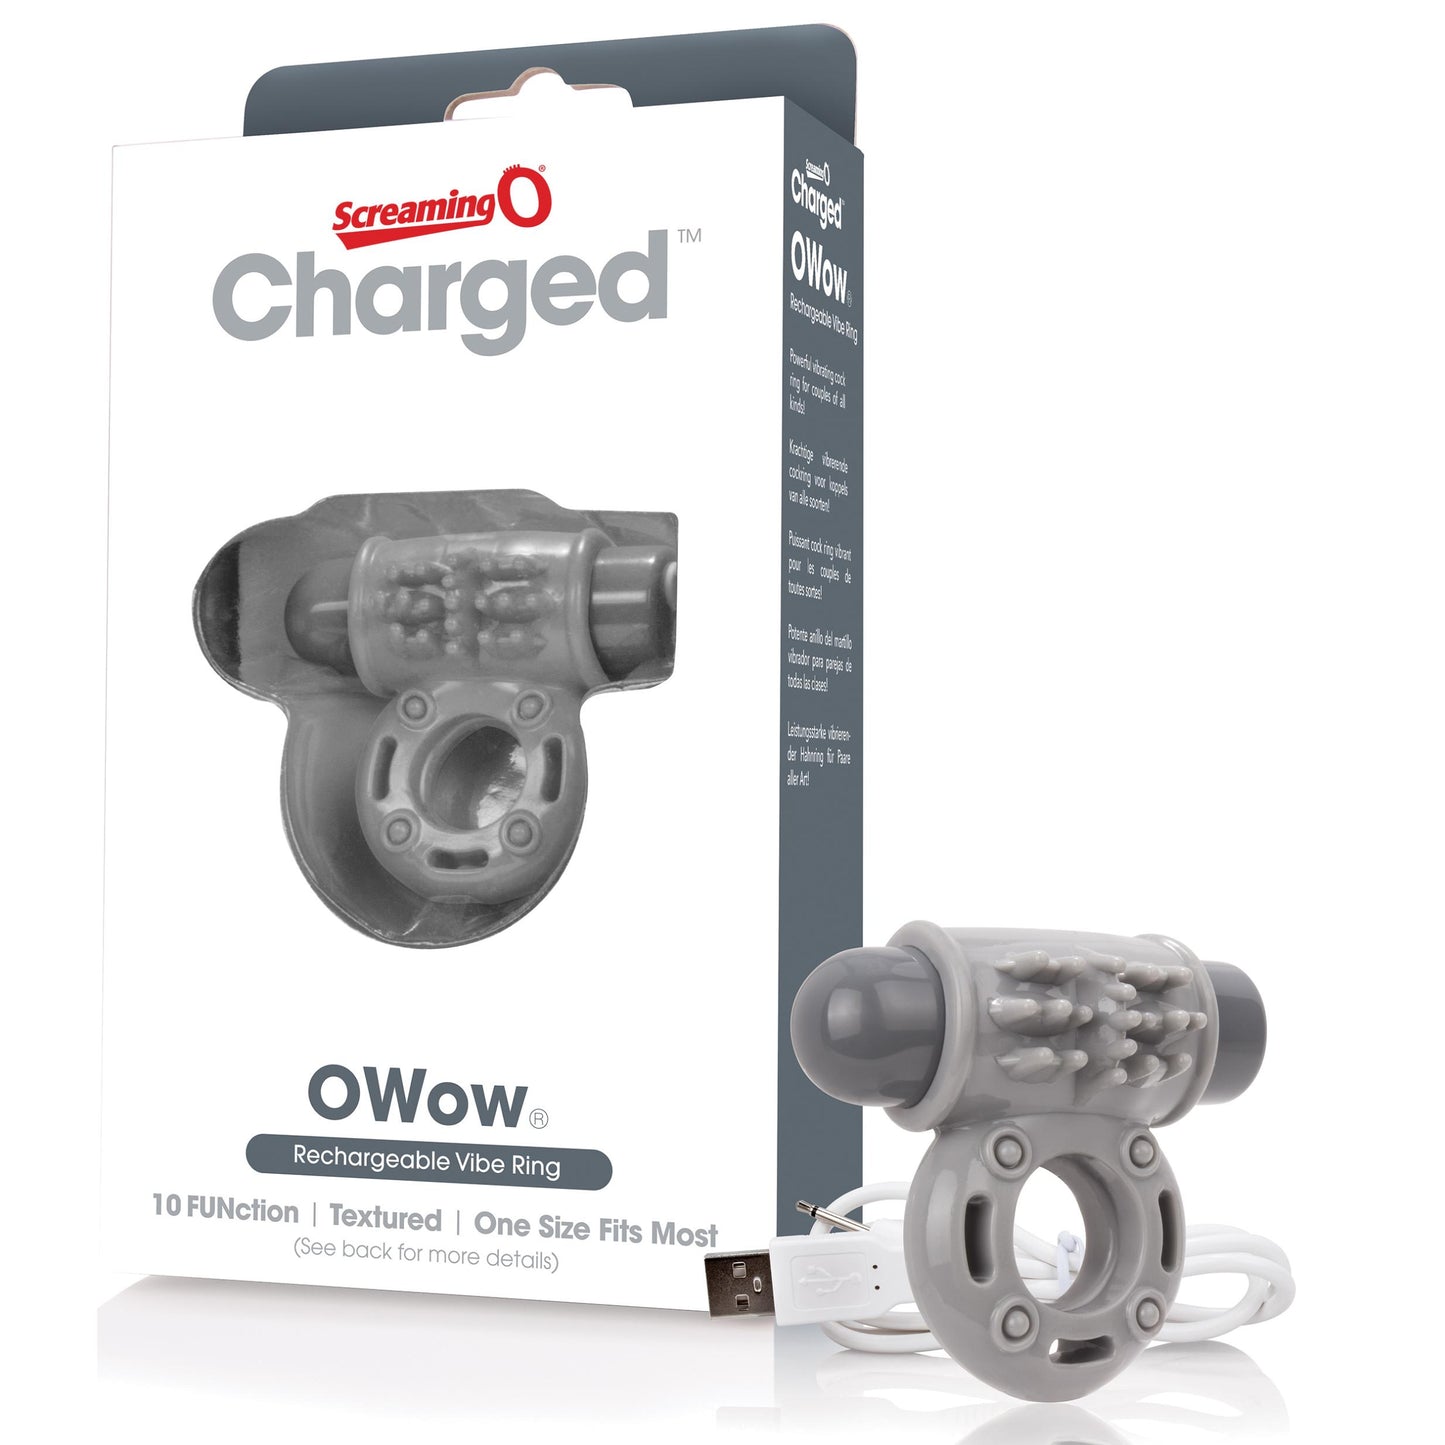 Charged Owow Rechargeable Vibe Ring